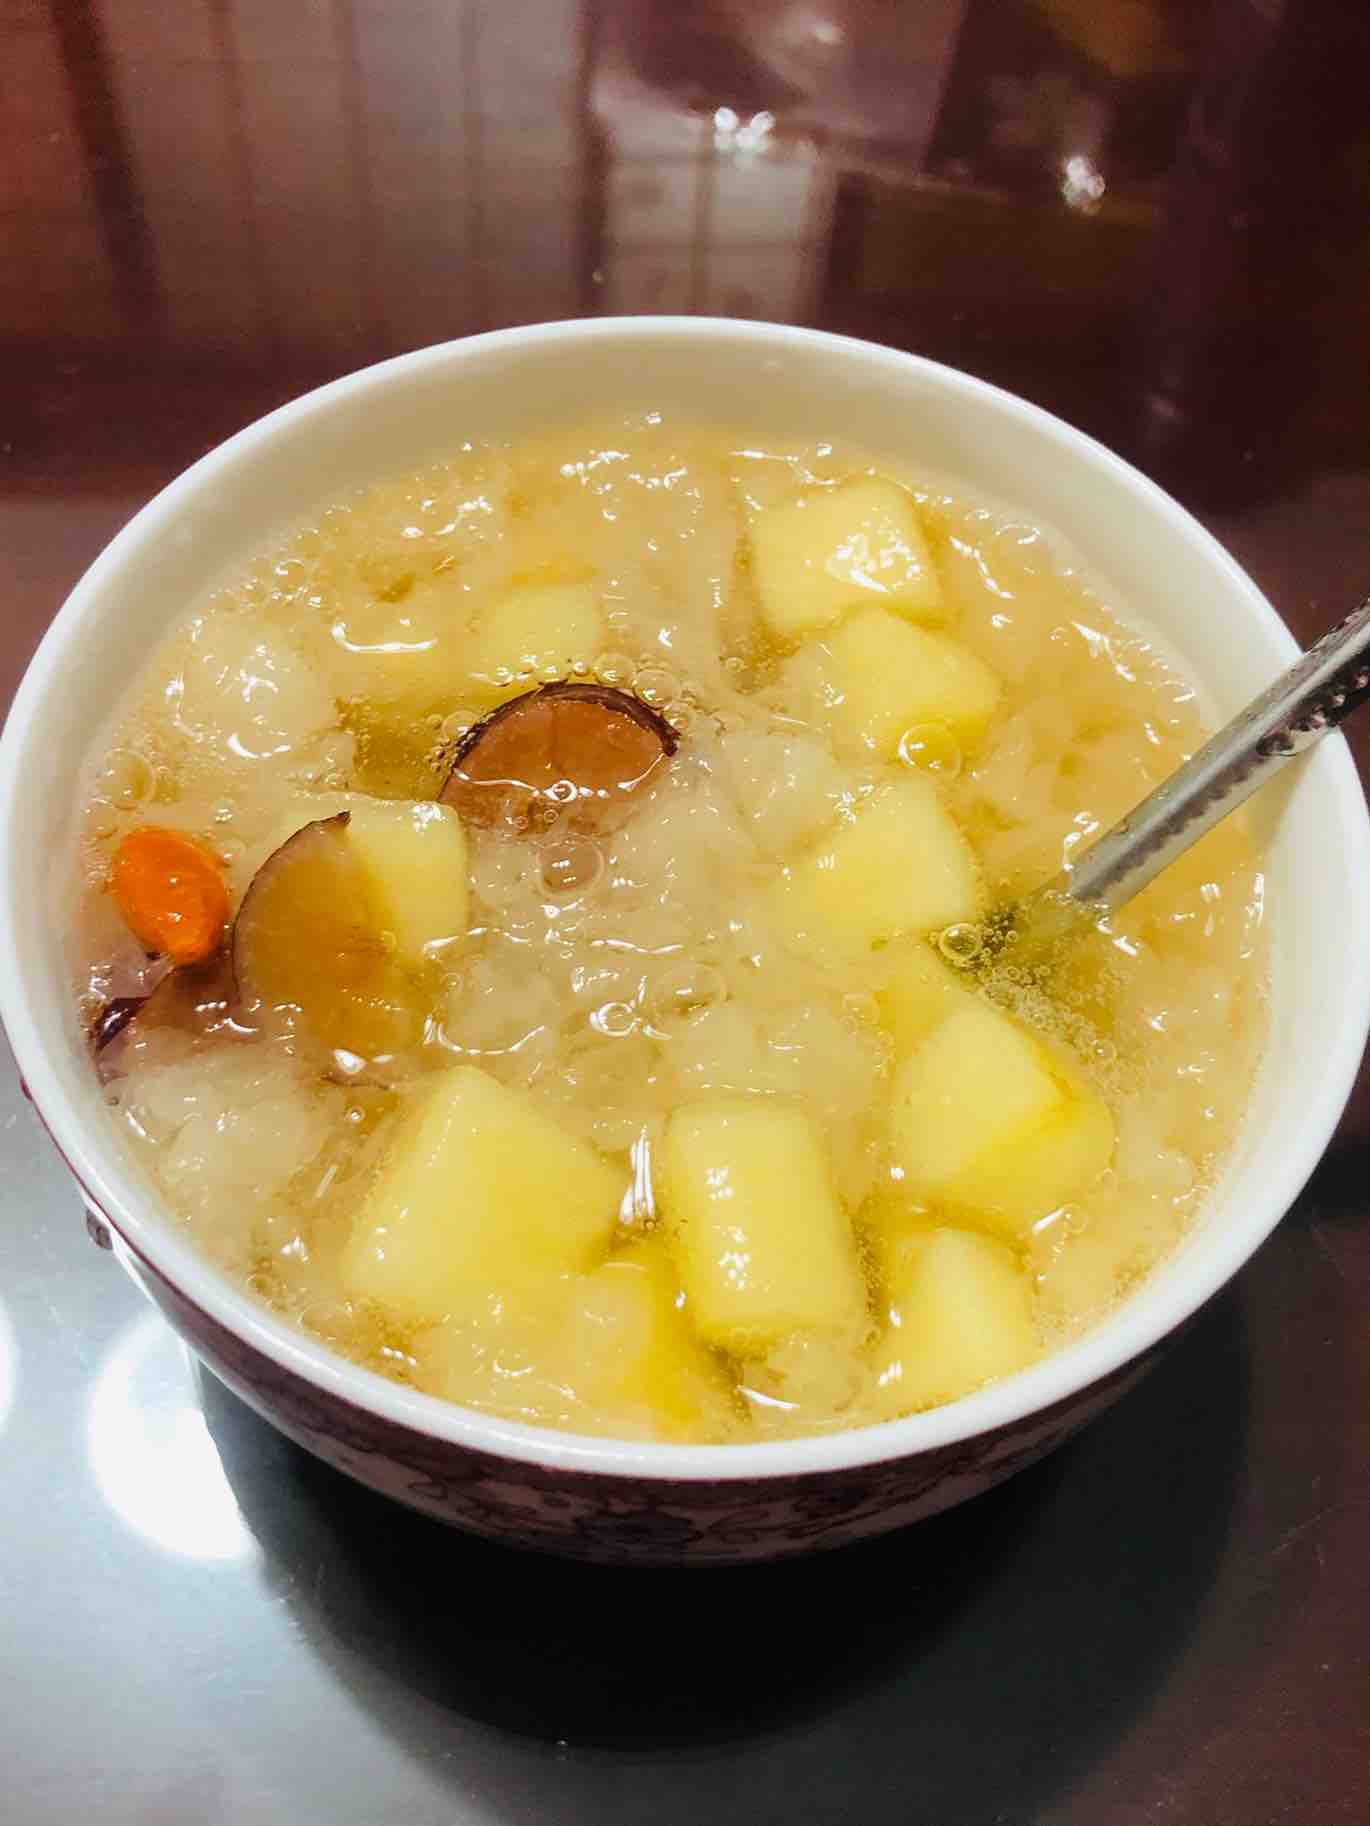 Apple, Red Dates and White Fungus Soup for Beauty and Beauty